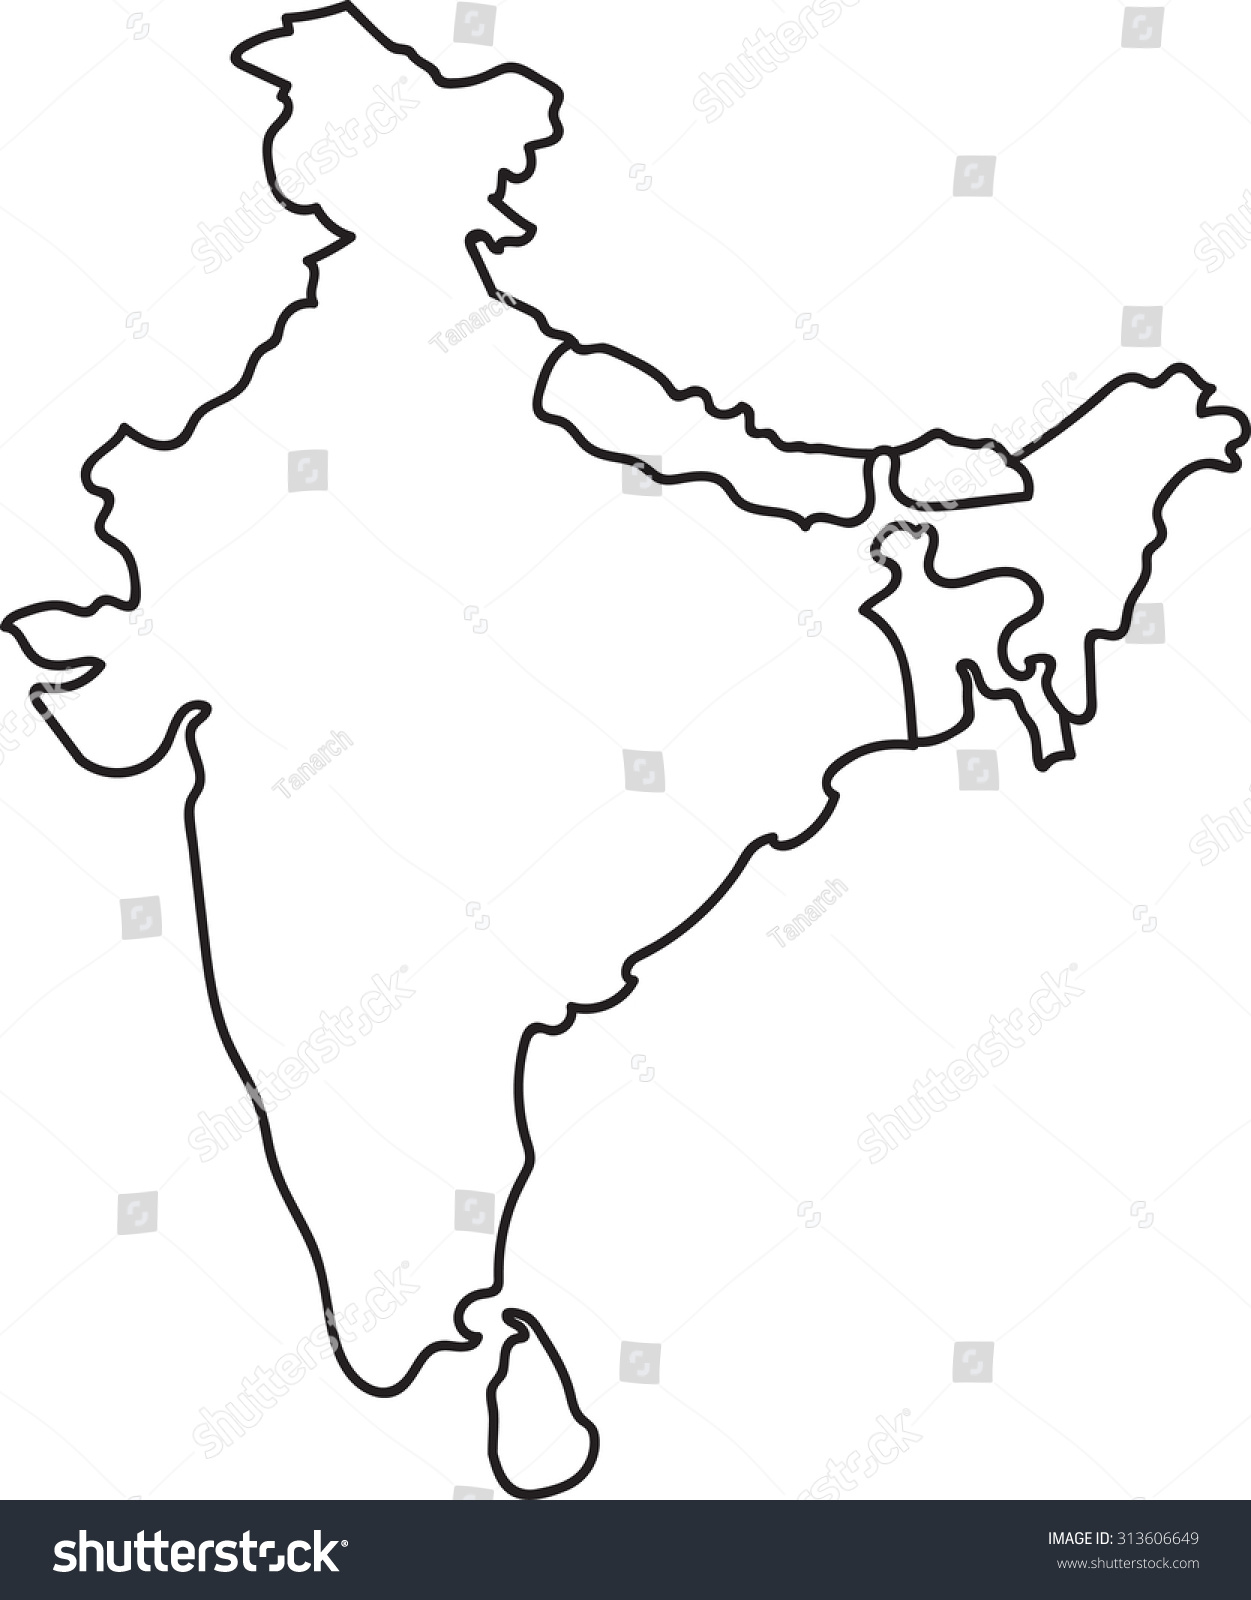 india map clipart vector - photo #39